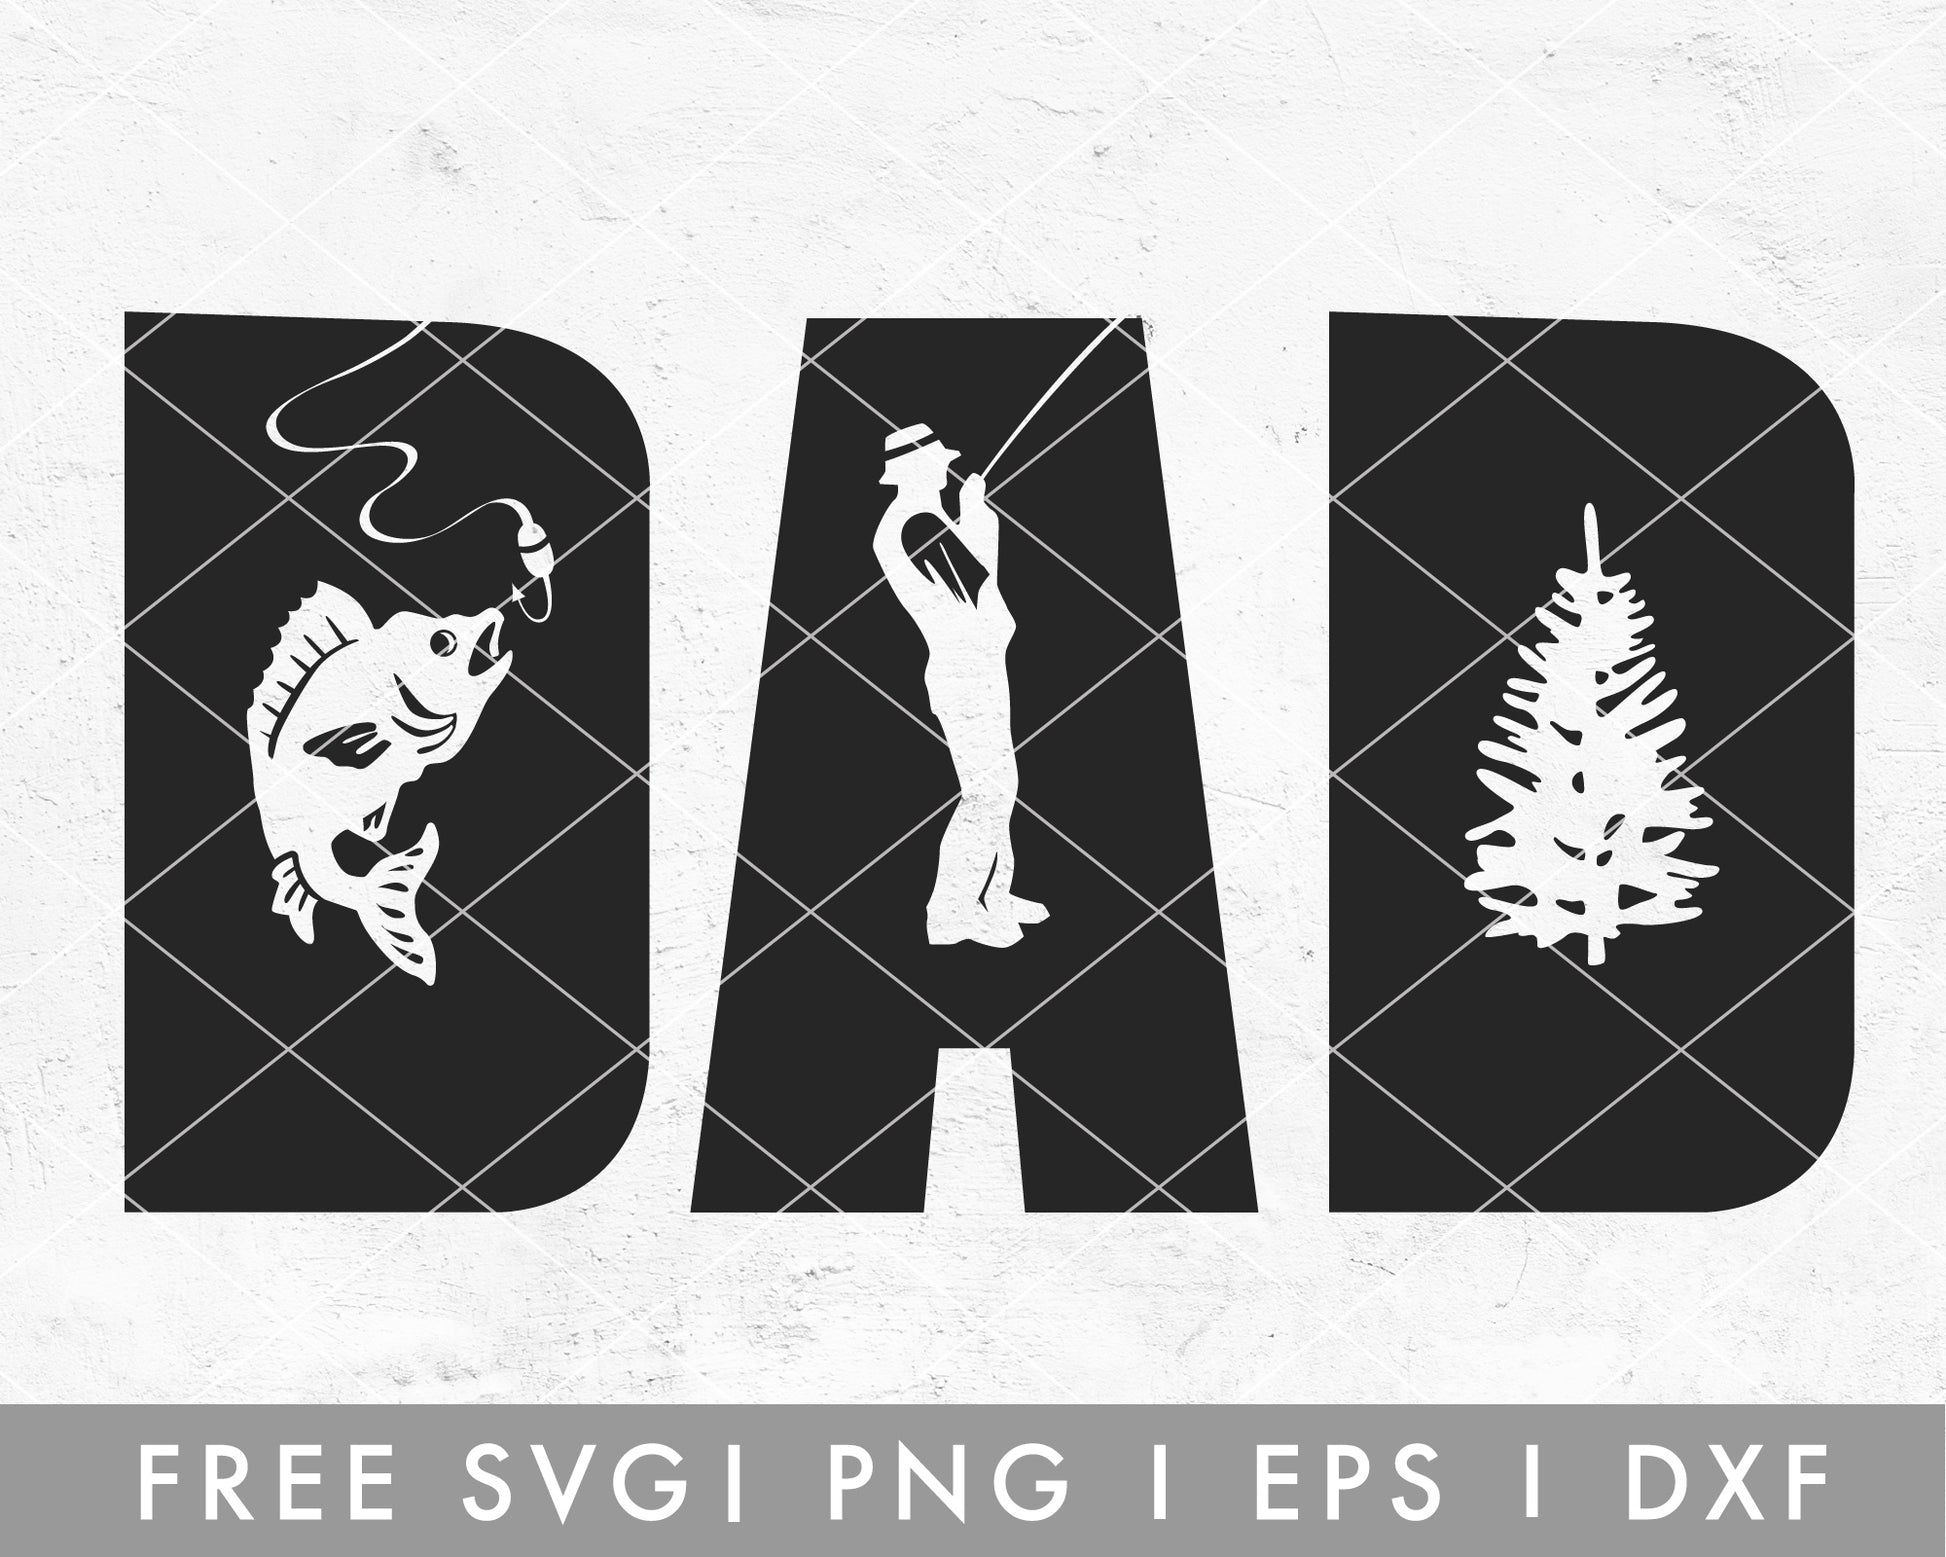 FREE Dad SVG | Fishing SVG Cut File for Cricut, Cameo Silhouette | Free SVG Cut File